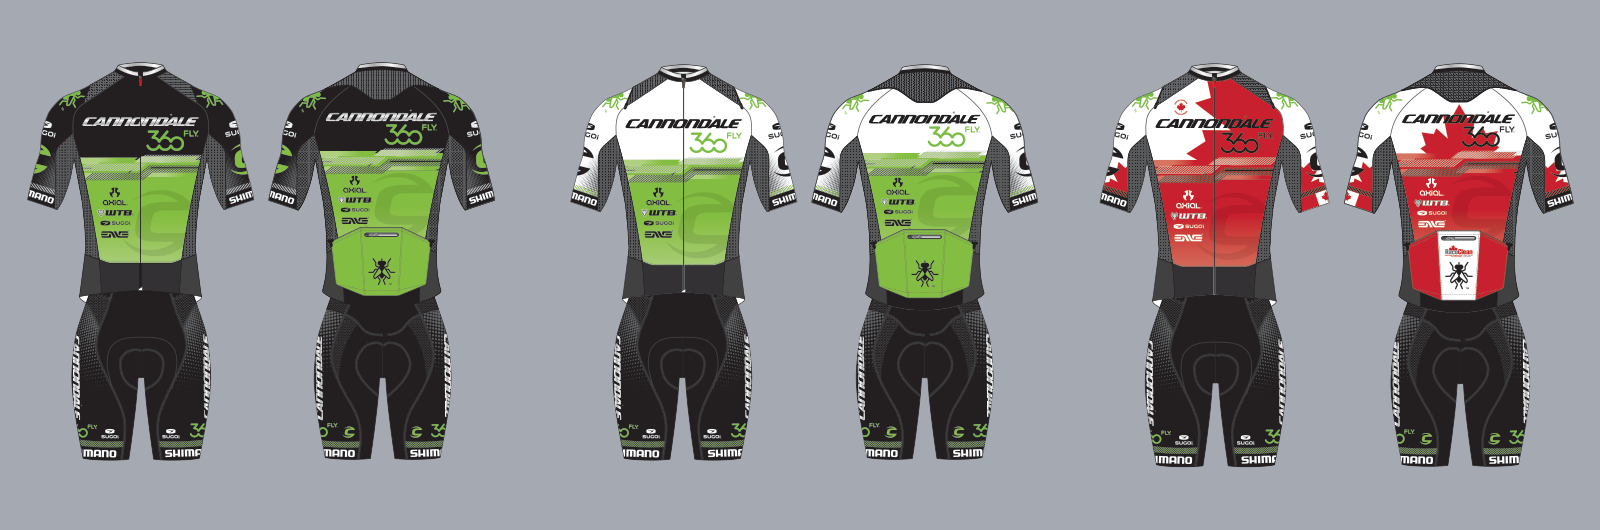 Infovelo.com---cannondale360fly-sugoi-2016